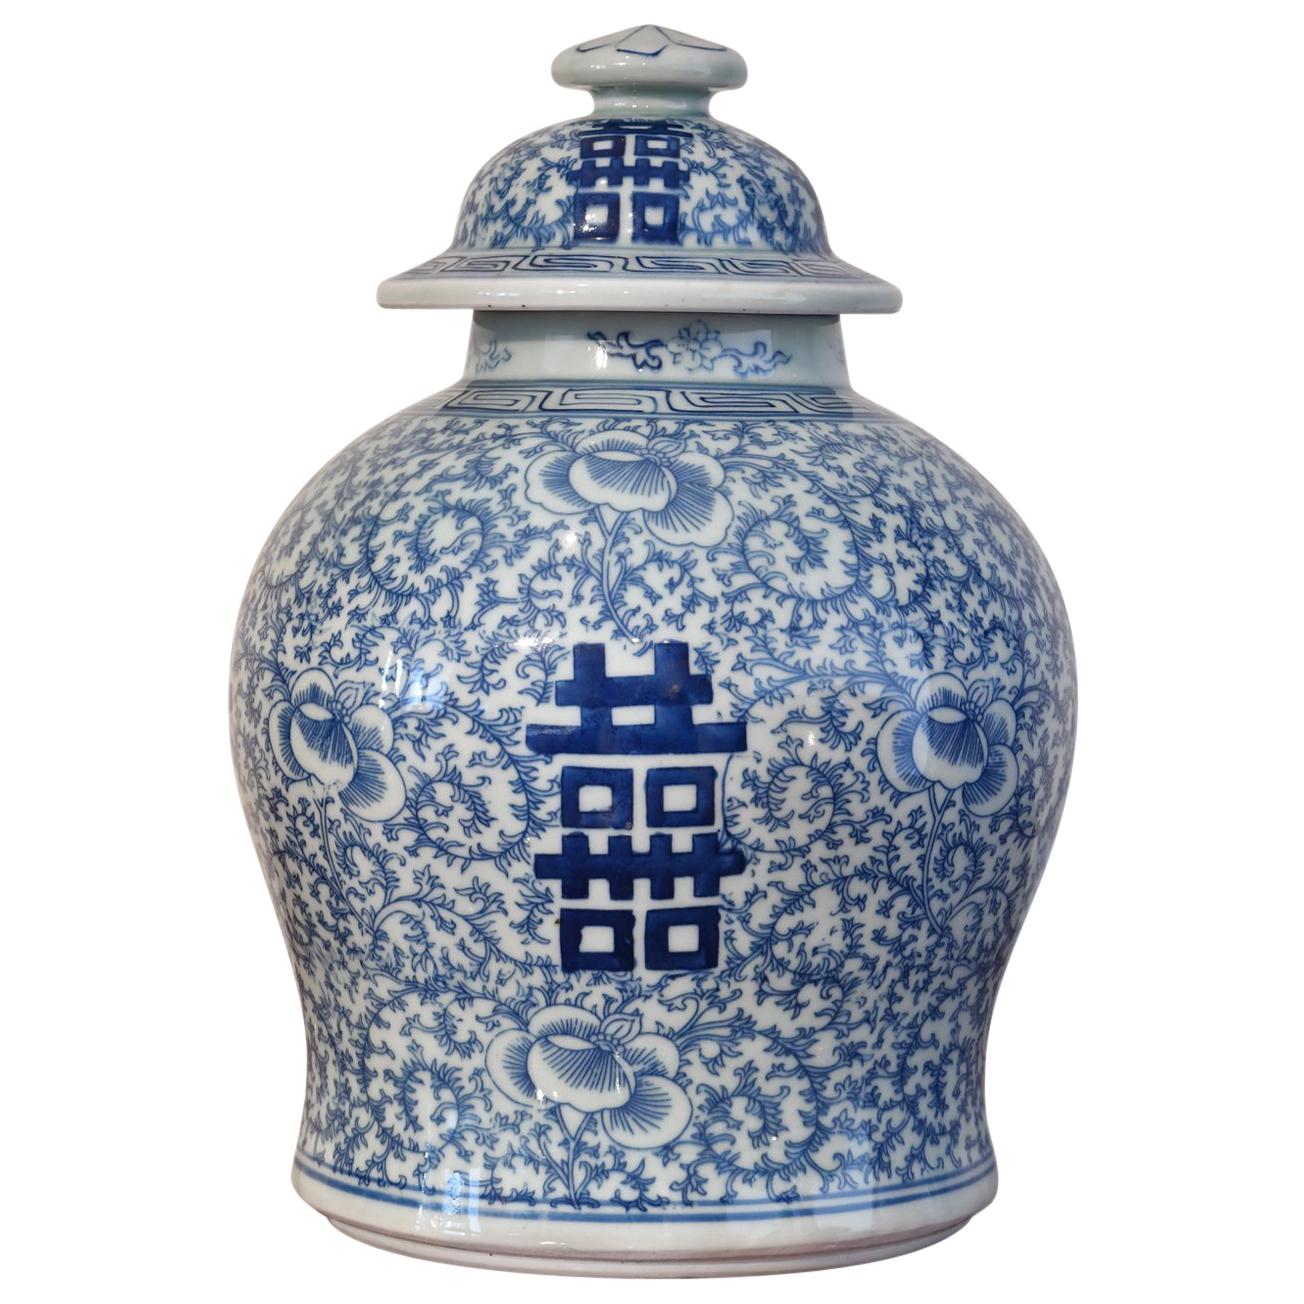 Qing Chinese Porcelain Blue & White Lidded Jar w/ Shuang-xi or Double Happiness